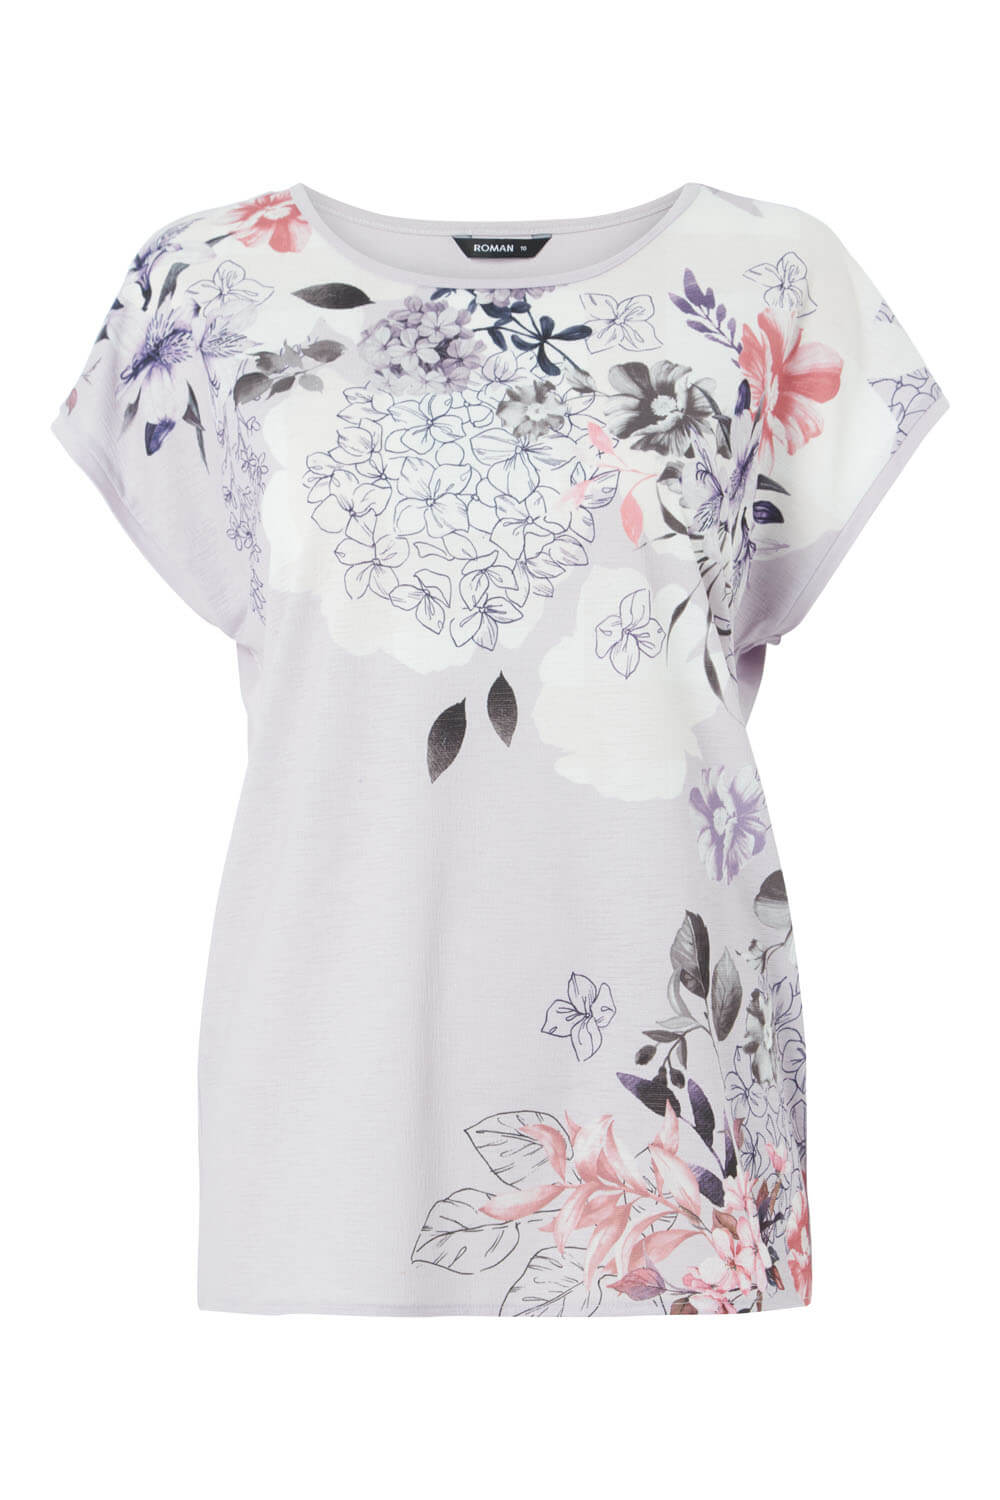 Lilac Floral Print T-Shirt Top, Image 4 of 8